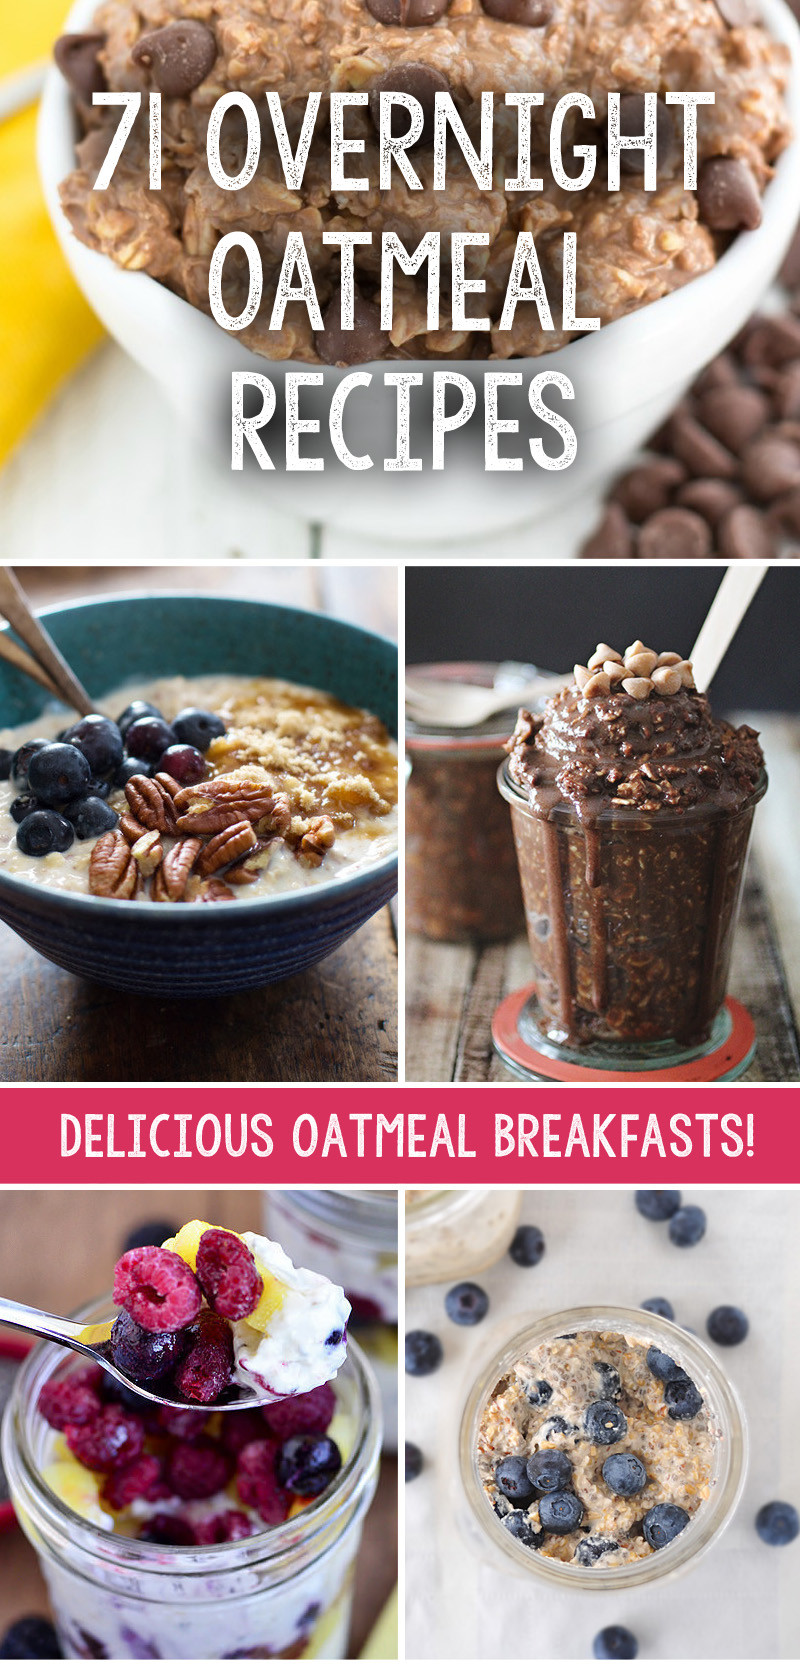 Oats Recipe For Weight Loss
 We have collected 71 incredible overnight oatmeal recipes